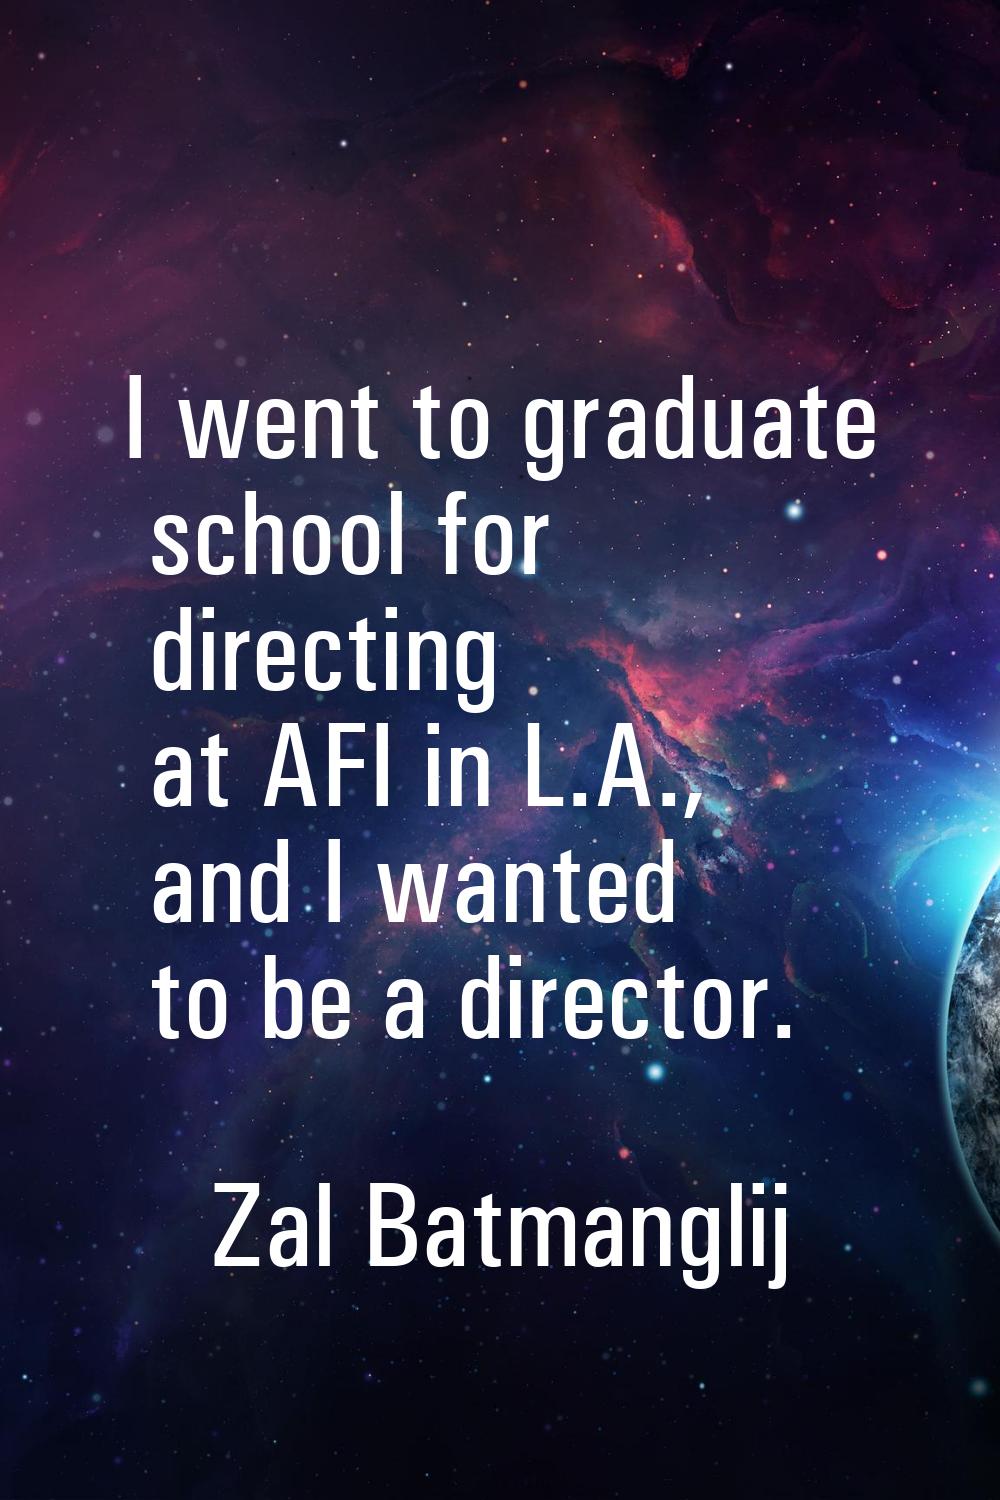 I went to graduate school for directing at AFI in L.A., and I wanted to be a director.